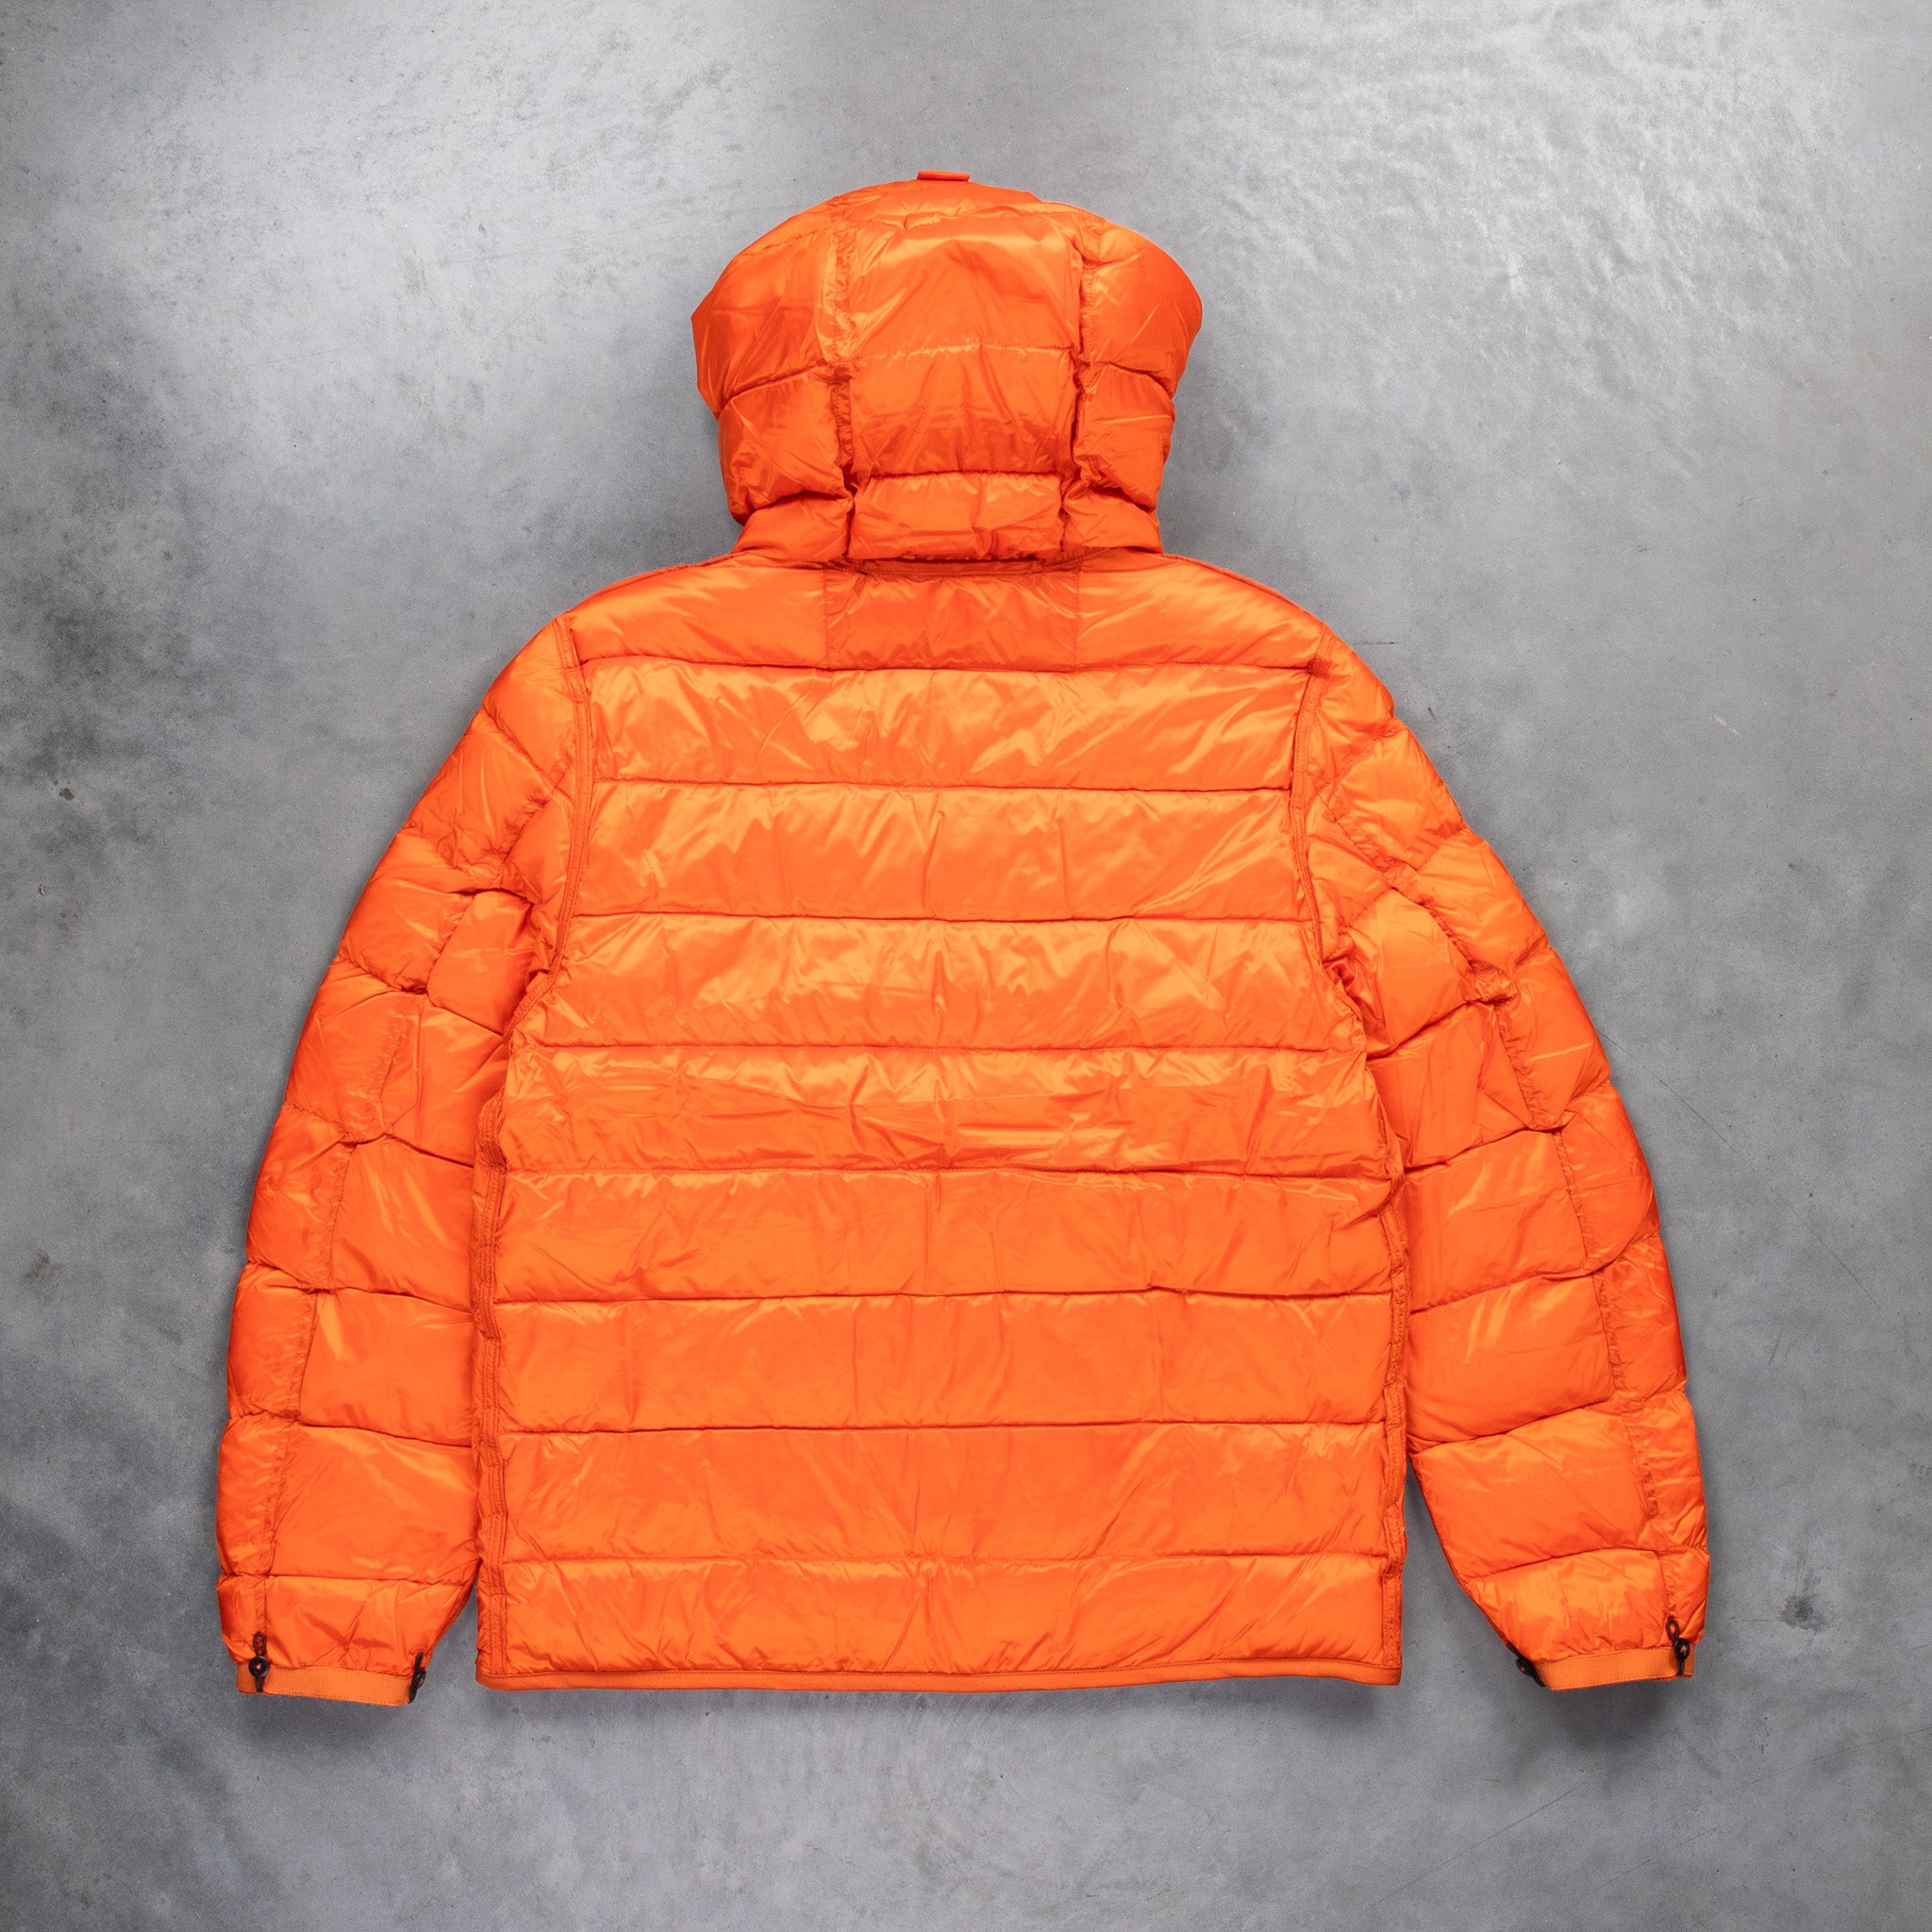 Ten C Hooded Down Liner with pockets Orange Frans Boone Exclusive